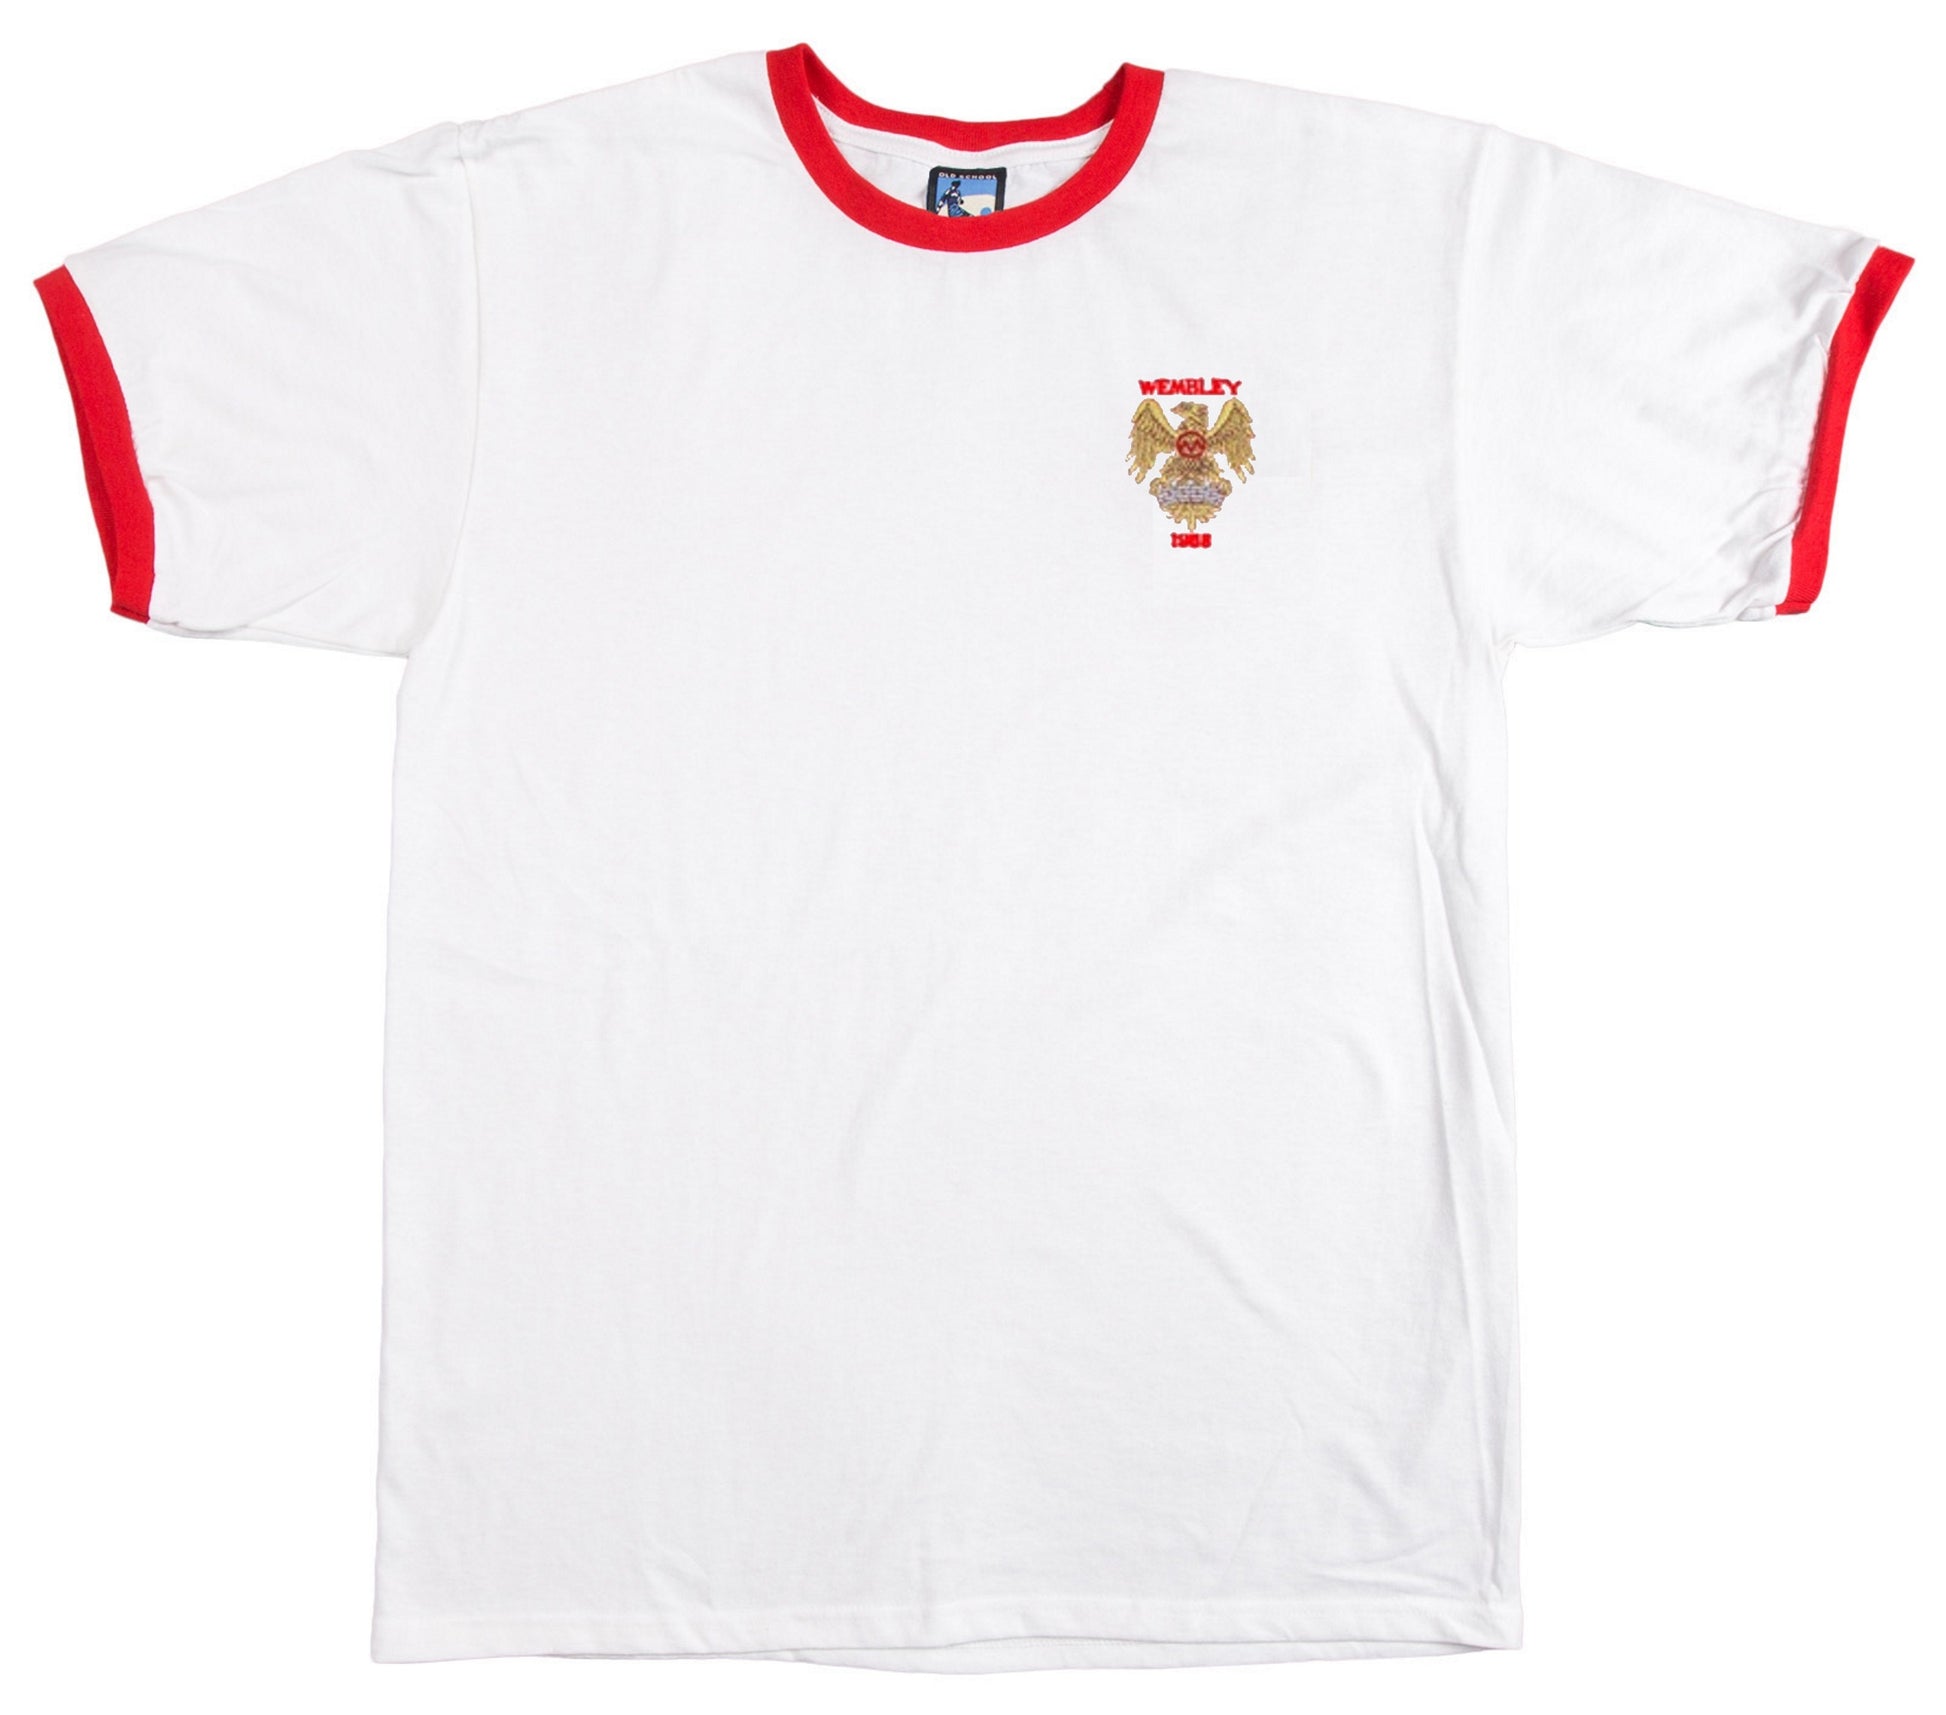 Manchester United Retro Football T Shirt 1958 FA Cup Final - Old School Football